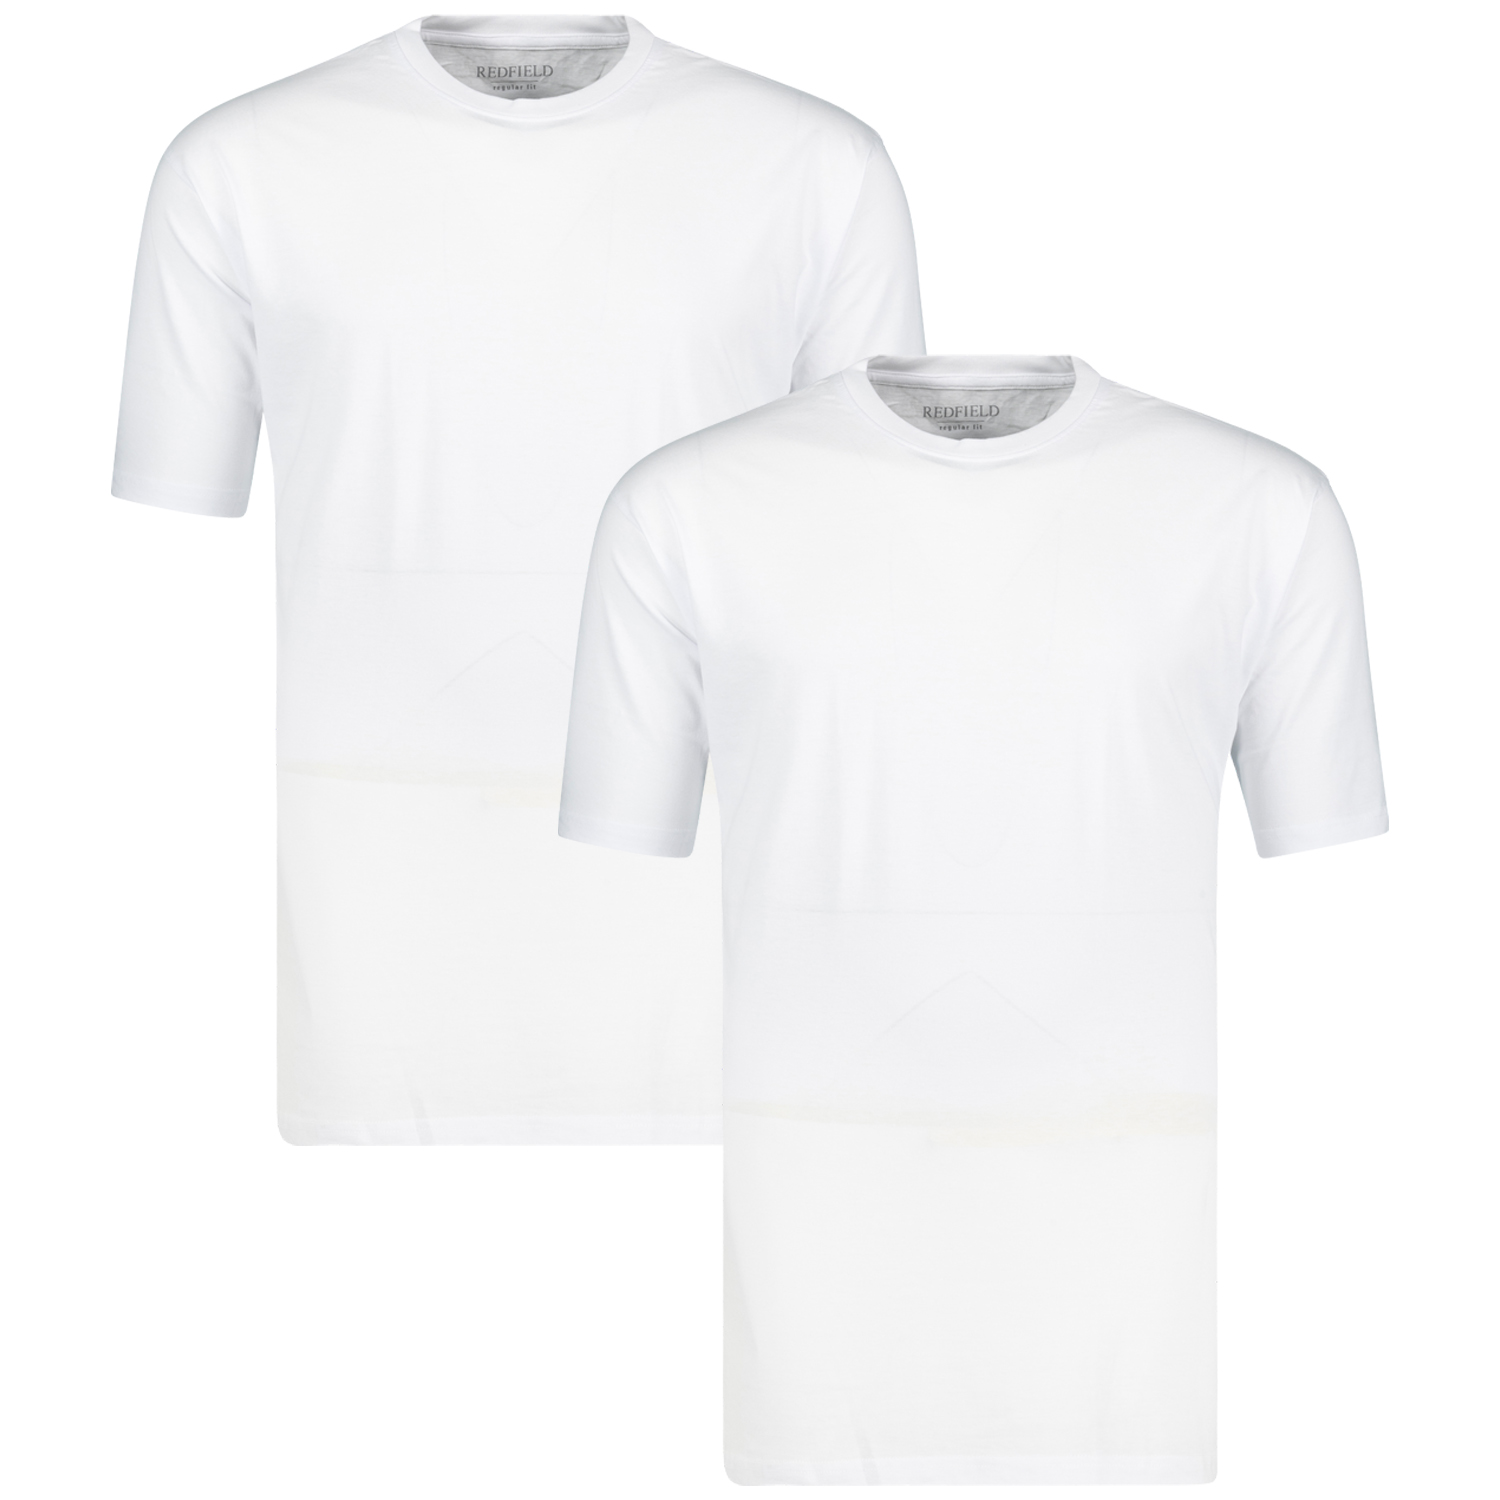 Pack of two white crew neck t-shirts by Redfield in oversizes up to 10XL